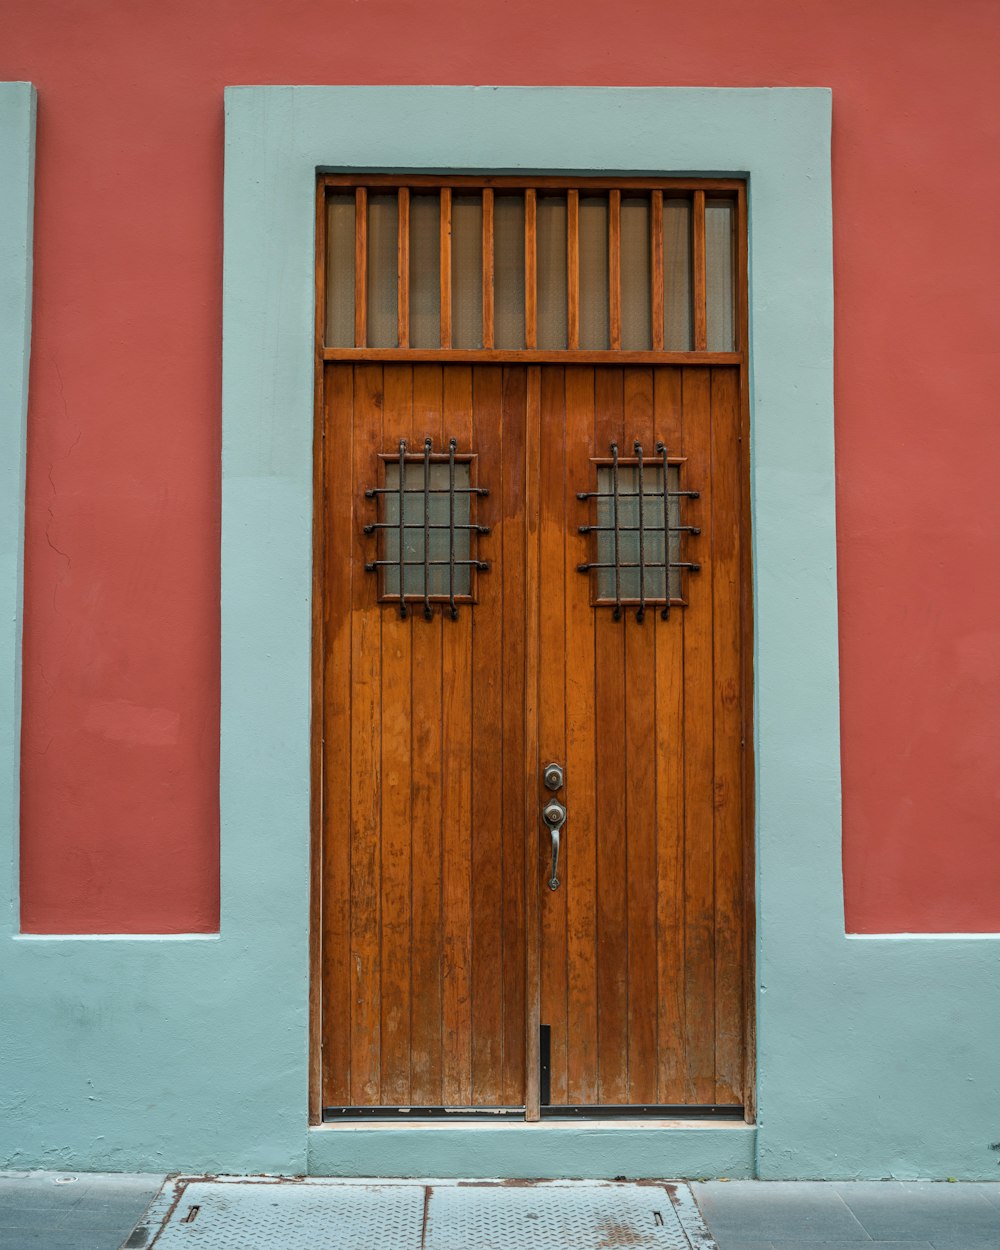 a wooden door with two windows on a building